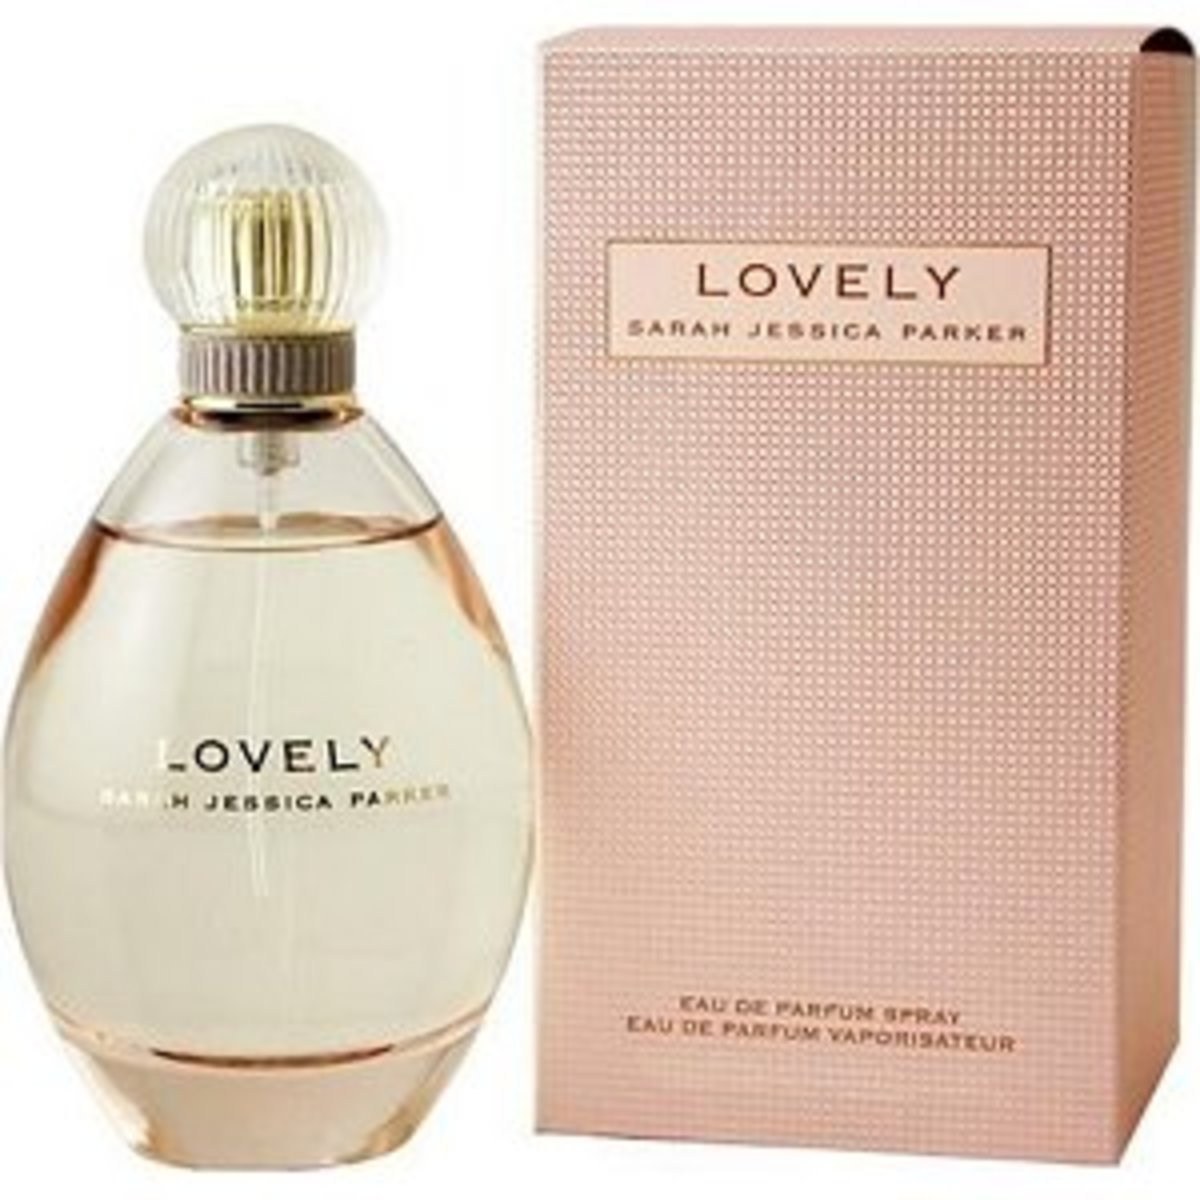 Lovely perfume by Sarah Jessica Parker is one of the top perfumes for women, judging by its popularity.